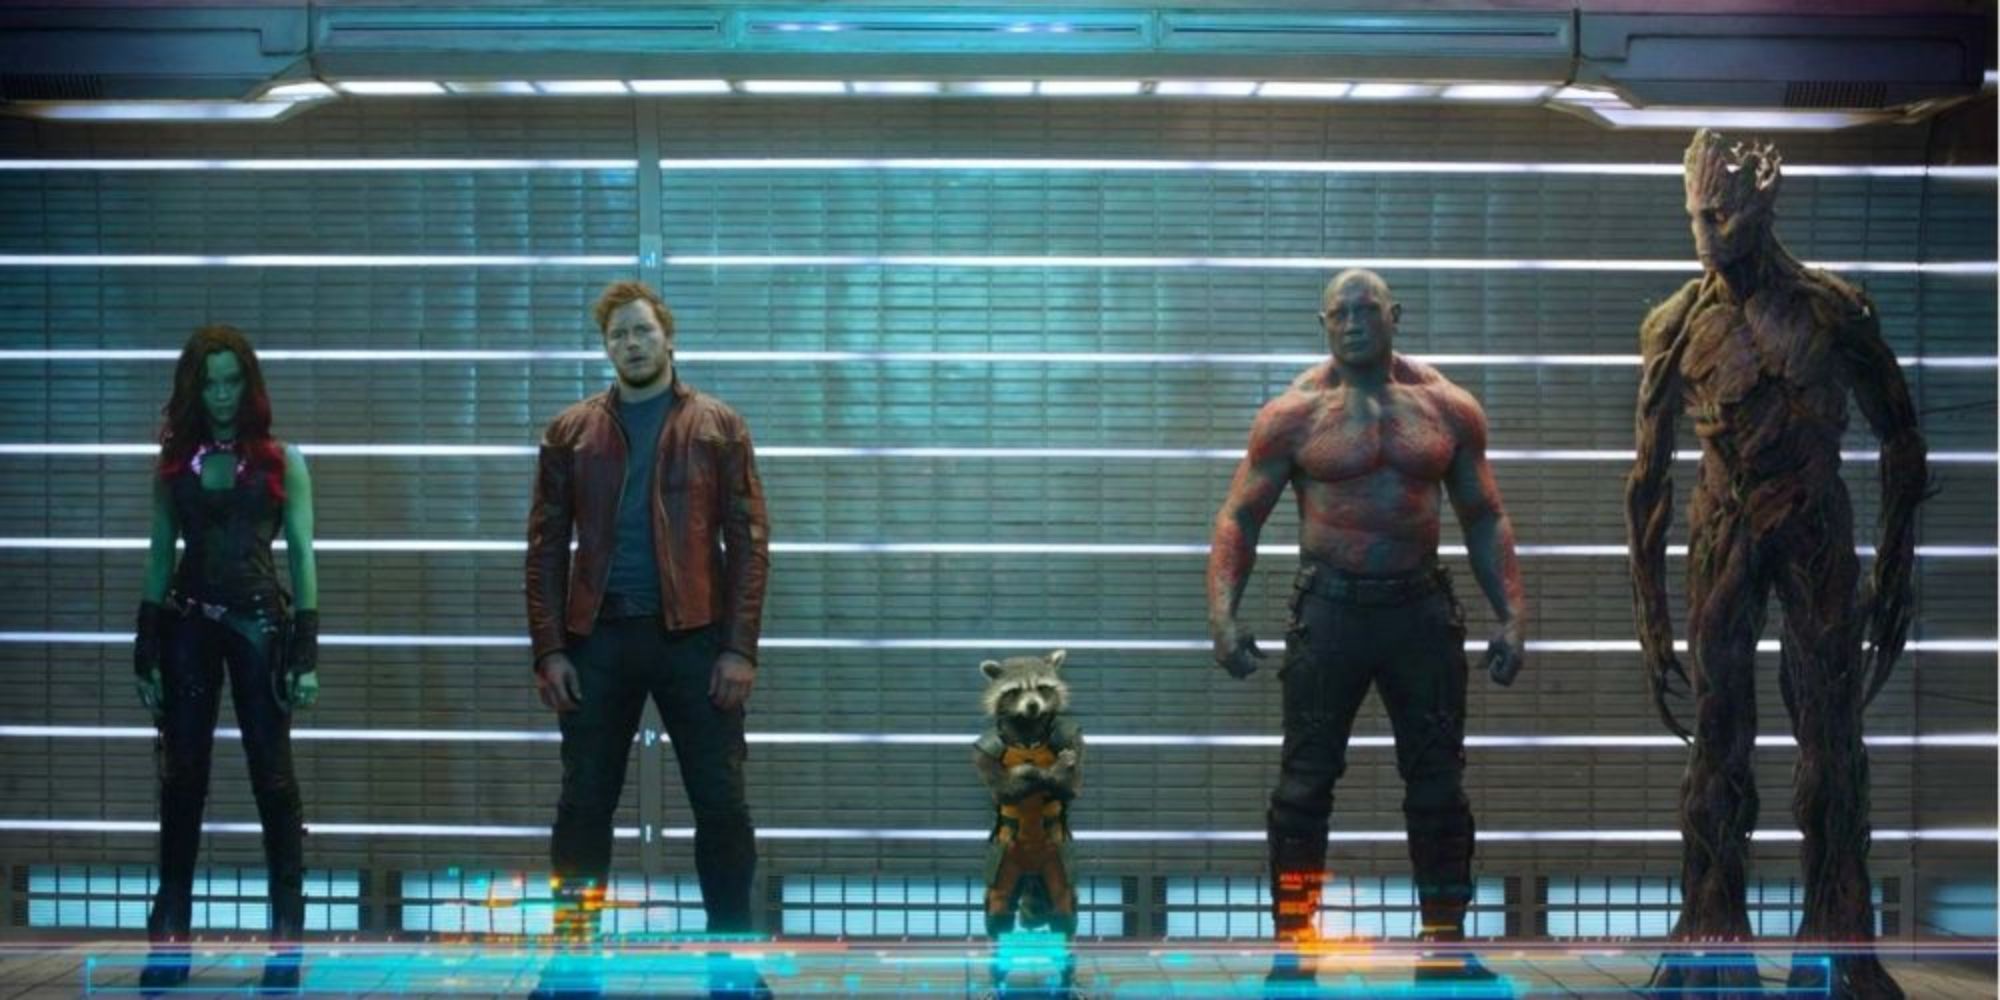 Guardians of the Galaxy group mugshot in Kyln prison